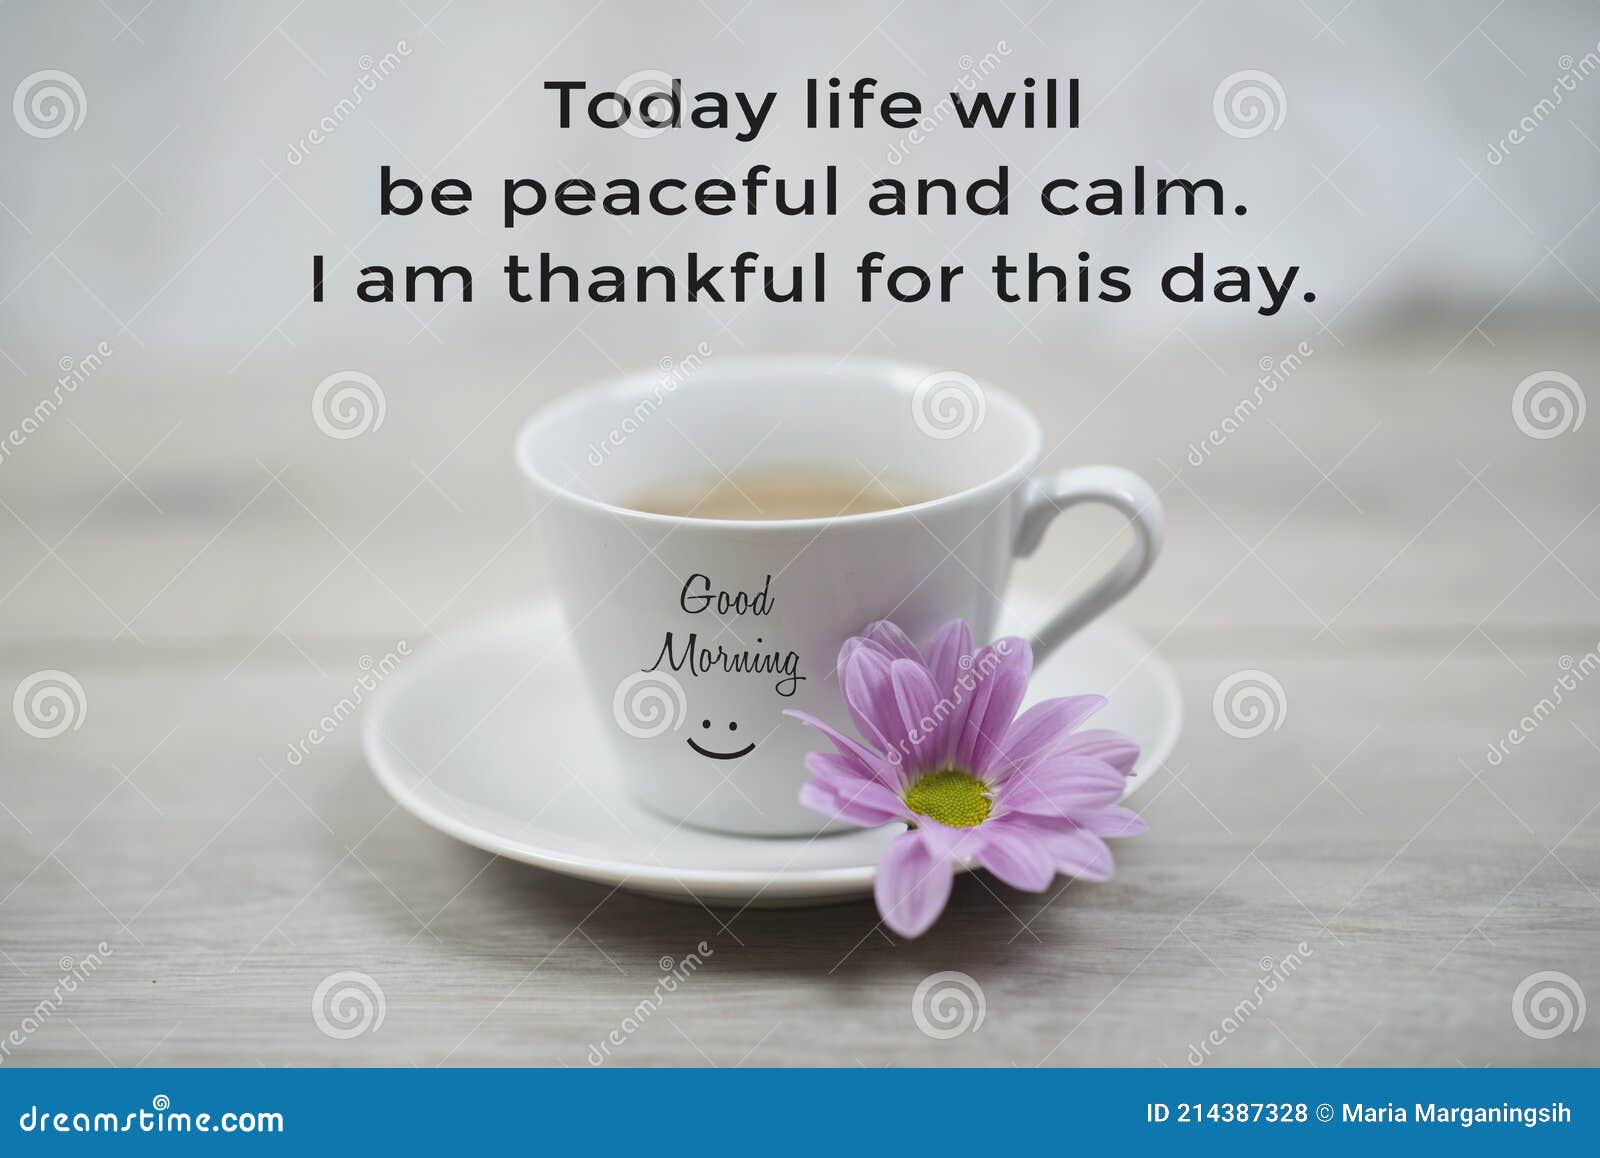 Inspirational Quote - Today Life Will Be Peaceful and Calm. I am ...